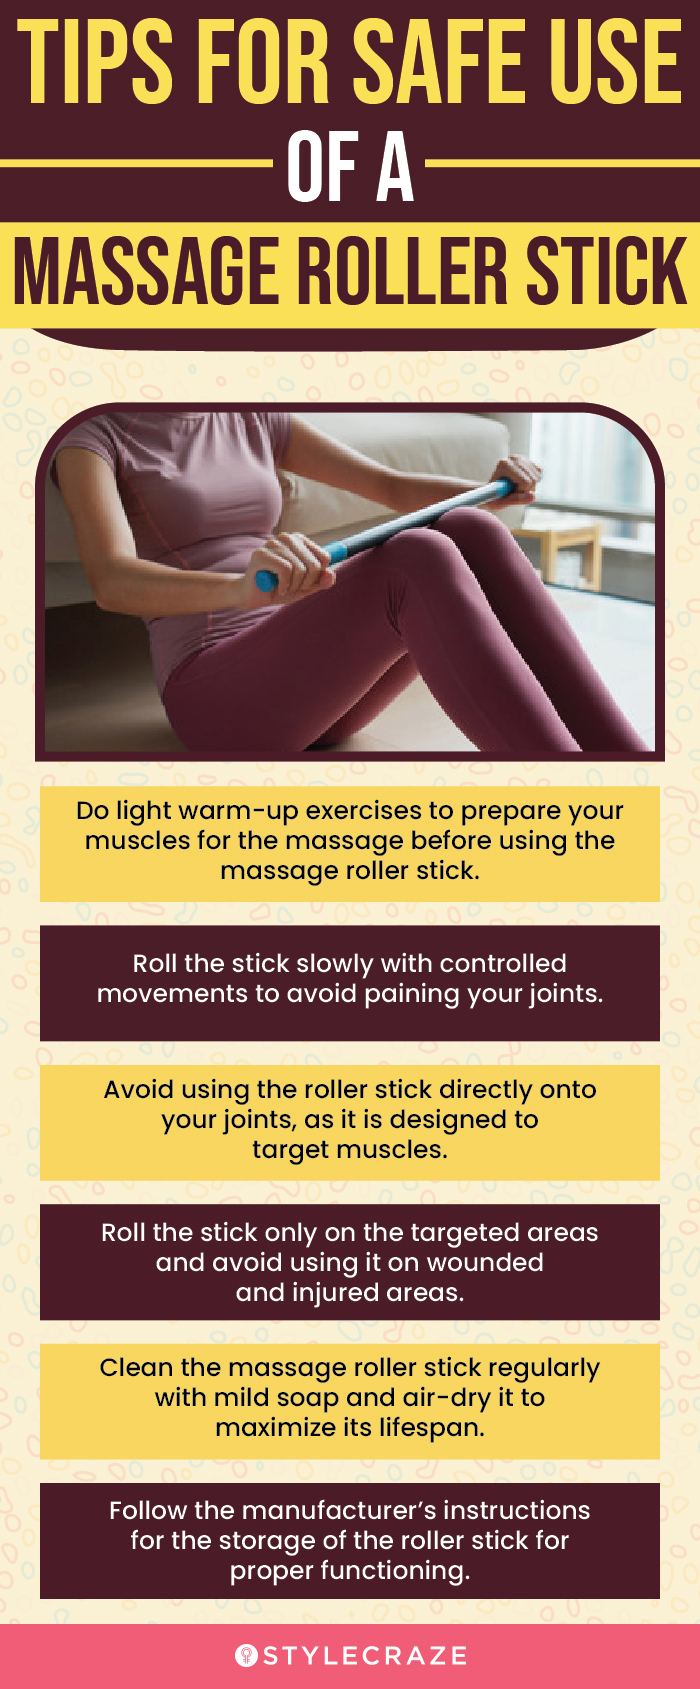 Tips For Safe Use Of A Massage Roller Stick (infographic)